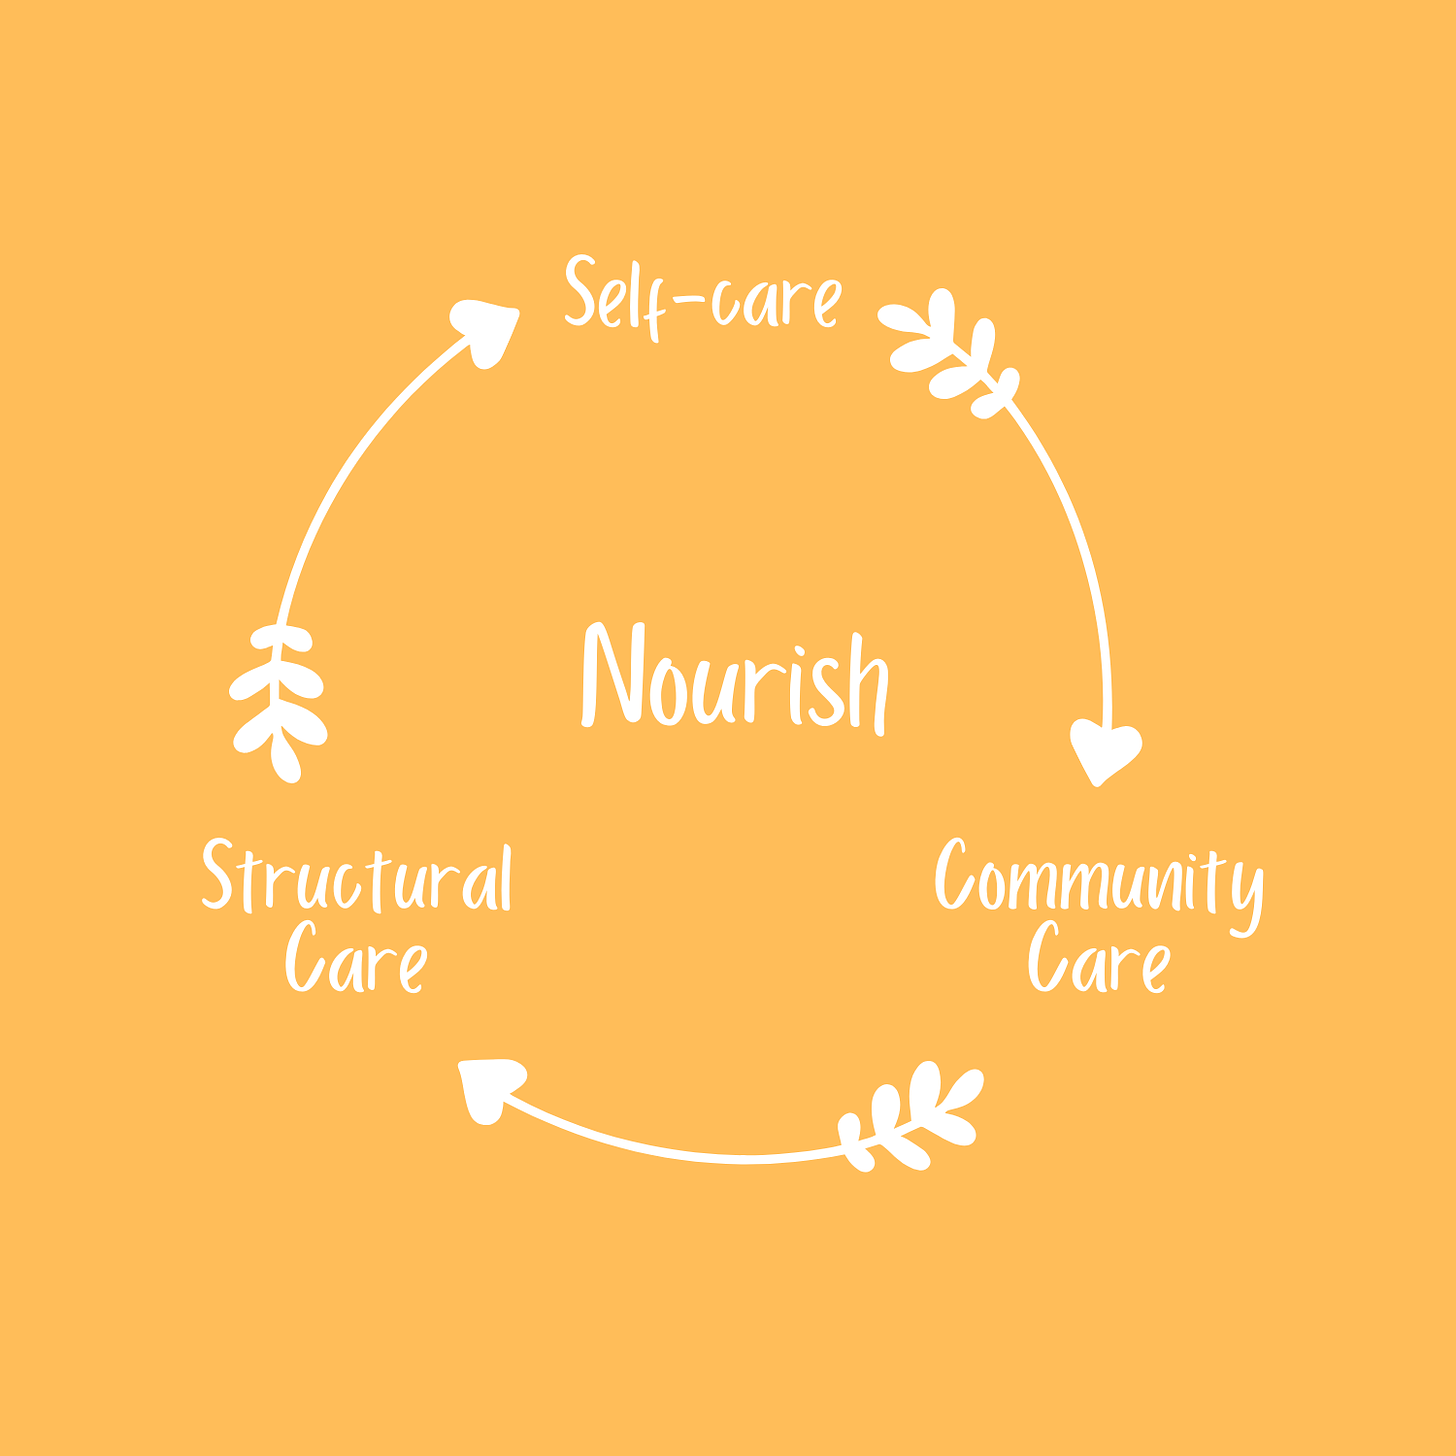 Description: this graphic depicts an ever-flowing cycle of self-care, community care, and structural care, centered on the theme of nourishing.